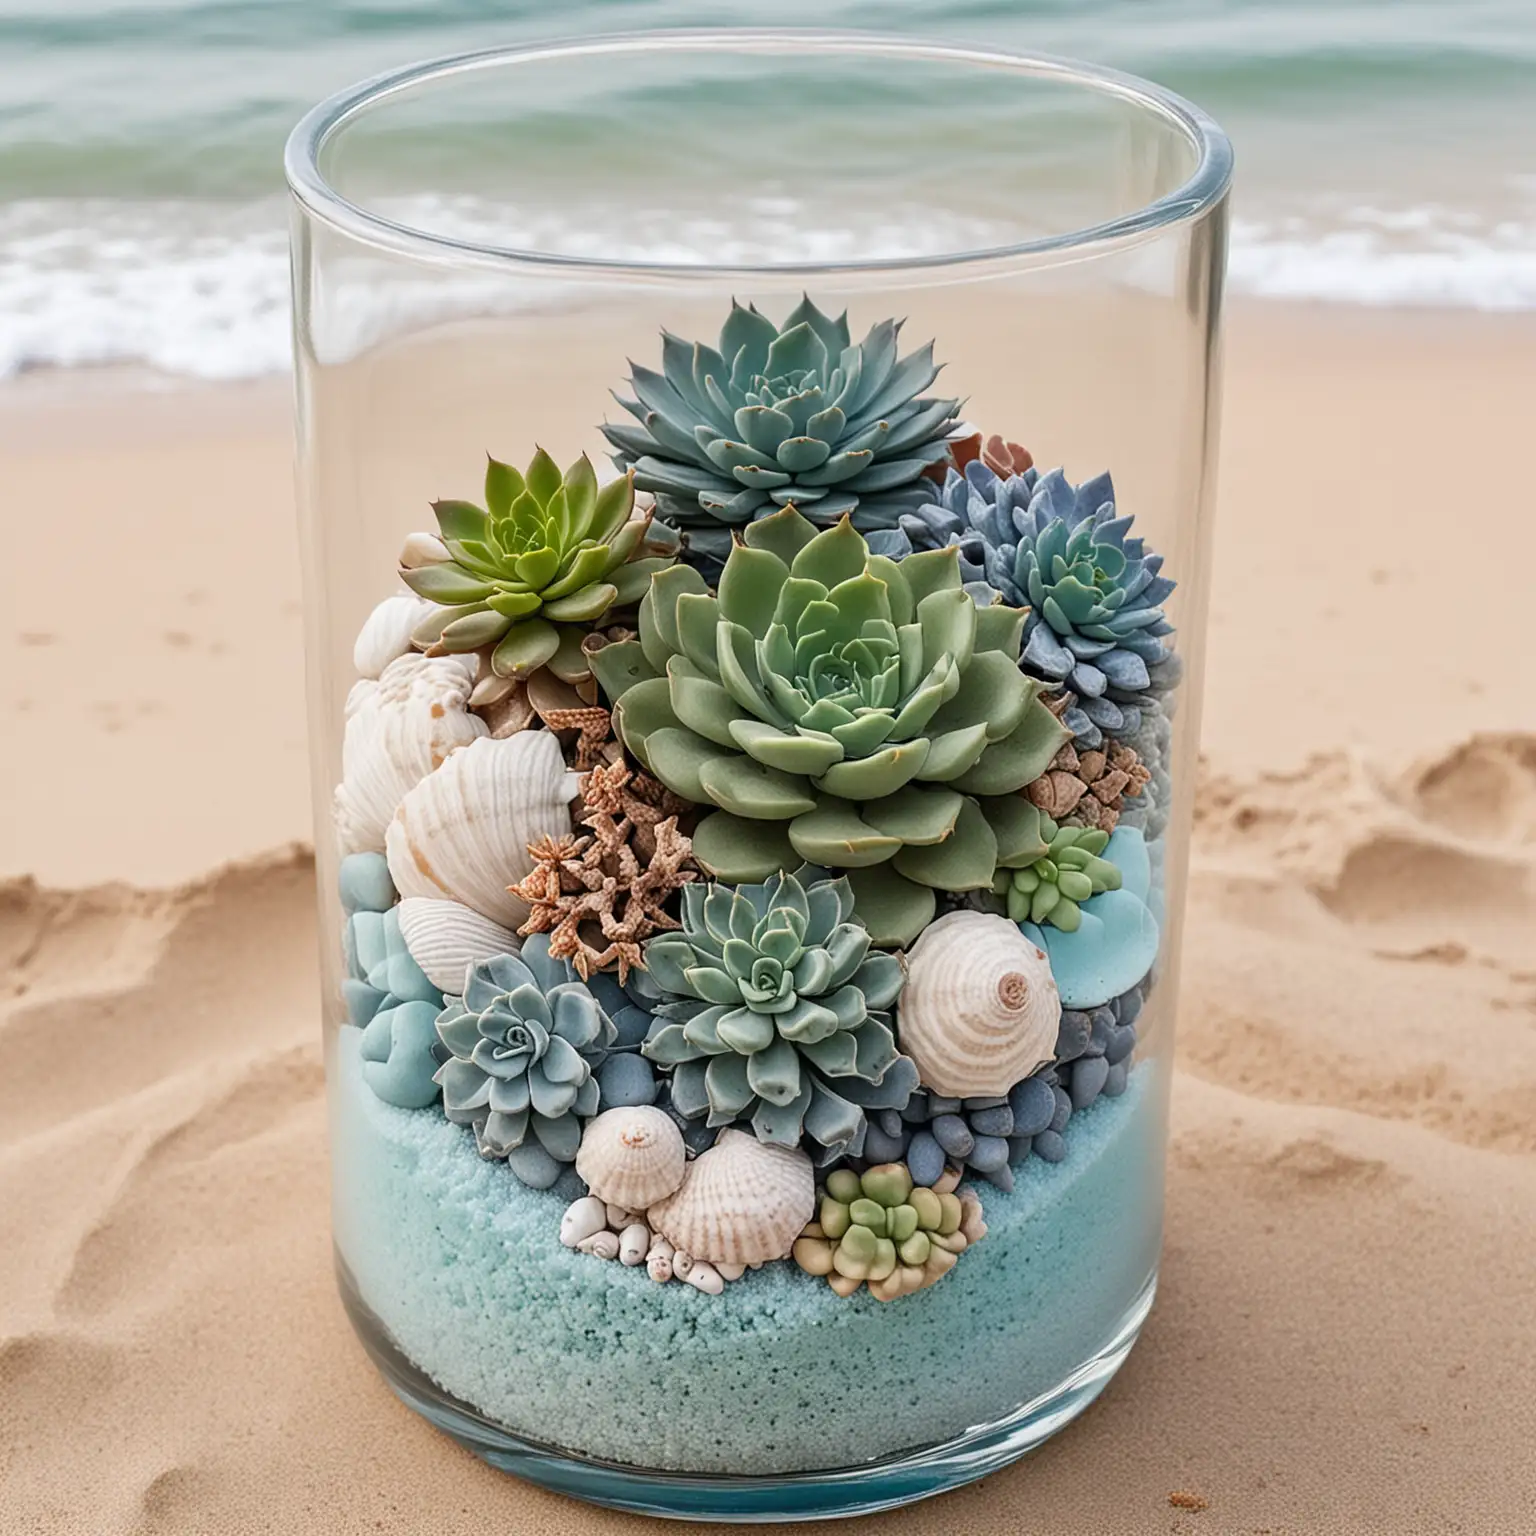 a simple wedding centerpiece with a cylinder glass vase filled with layers of different shades of blue sand topped with  a few succulents and seashells for a simple DIY beach centerpiece